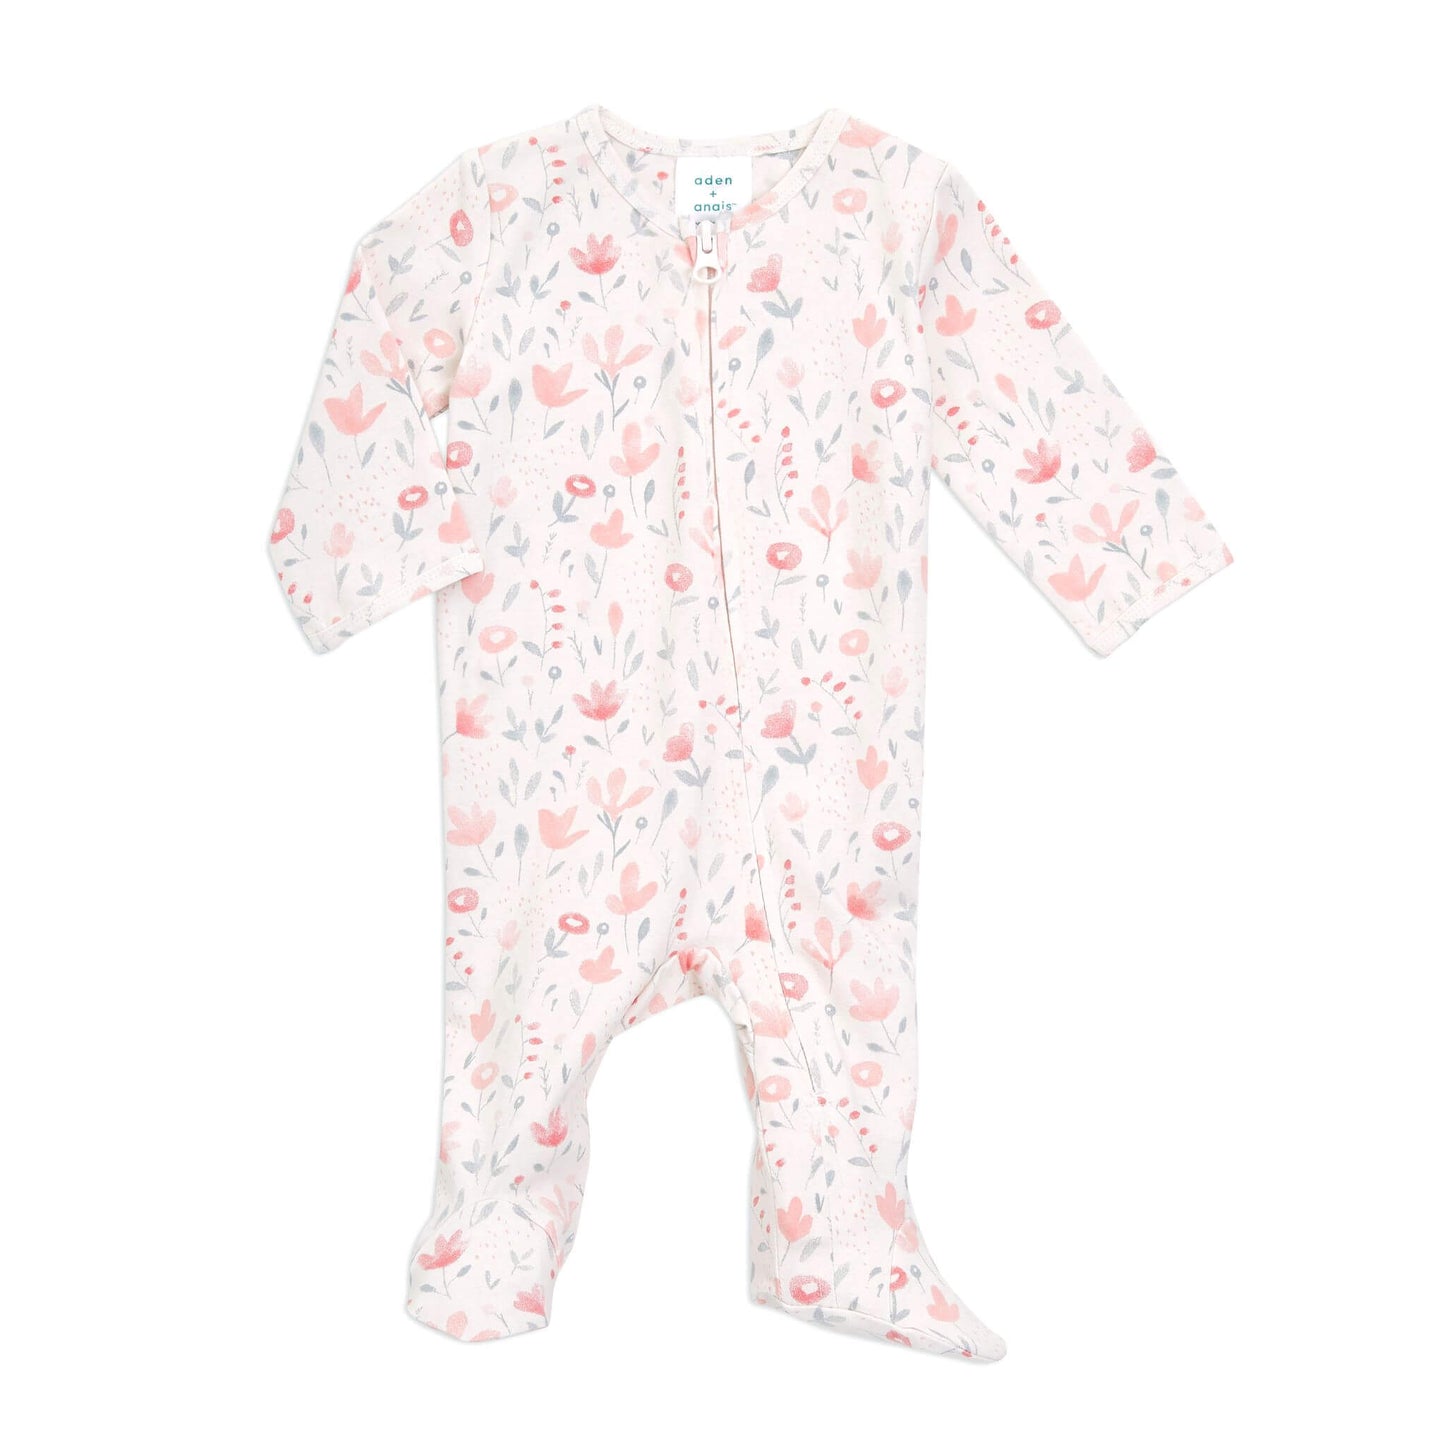 Super soft with just the right amount of stretch, the aden + anais baby footie offers maximum comfort and security. Featuring a functional “top to toe” zip for easy nappy changes.